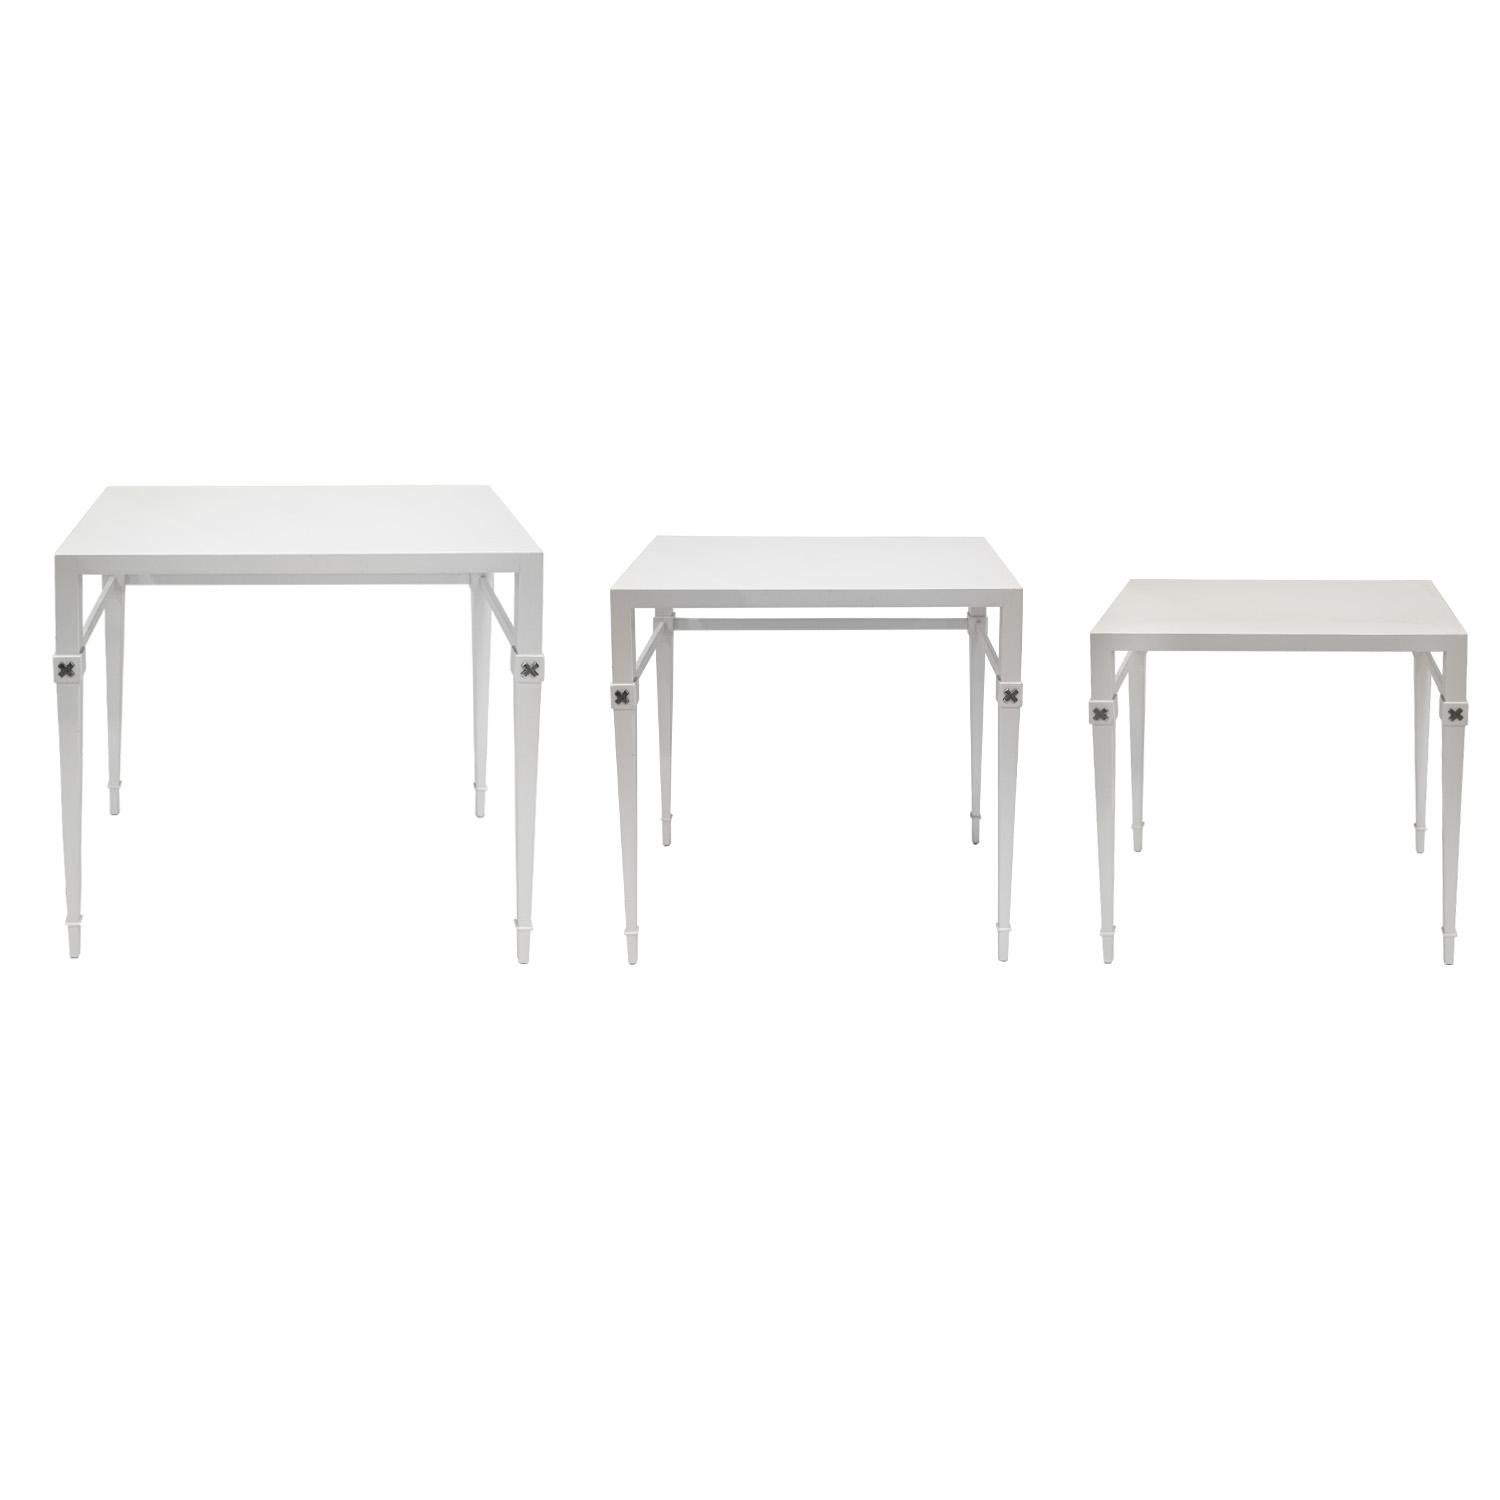 Hand-Crafted Tommi Parzinger Rare Set of 3 Nesting Tables in White Lacquer 1940s, 'Signed' For Sale